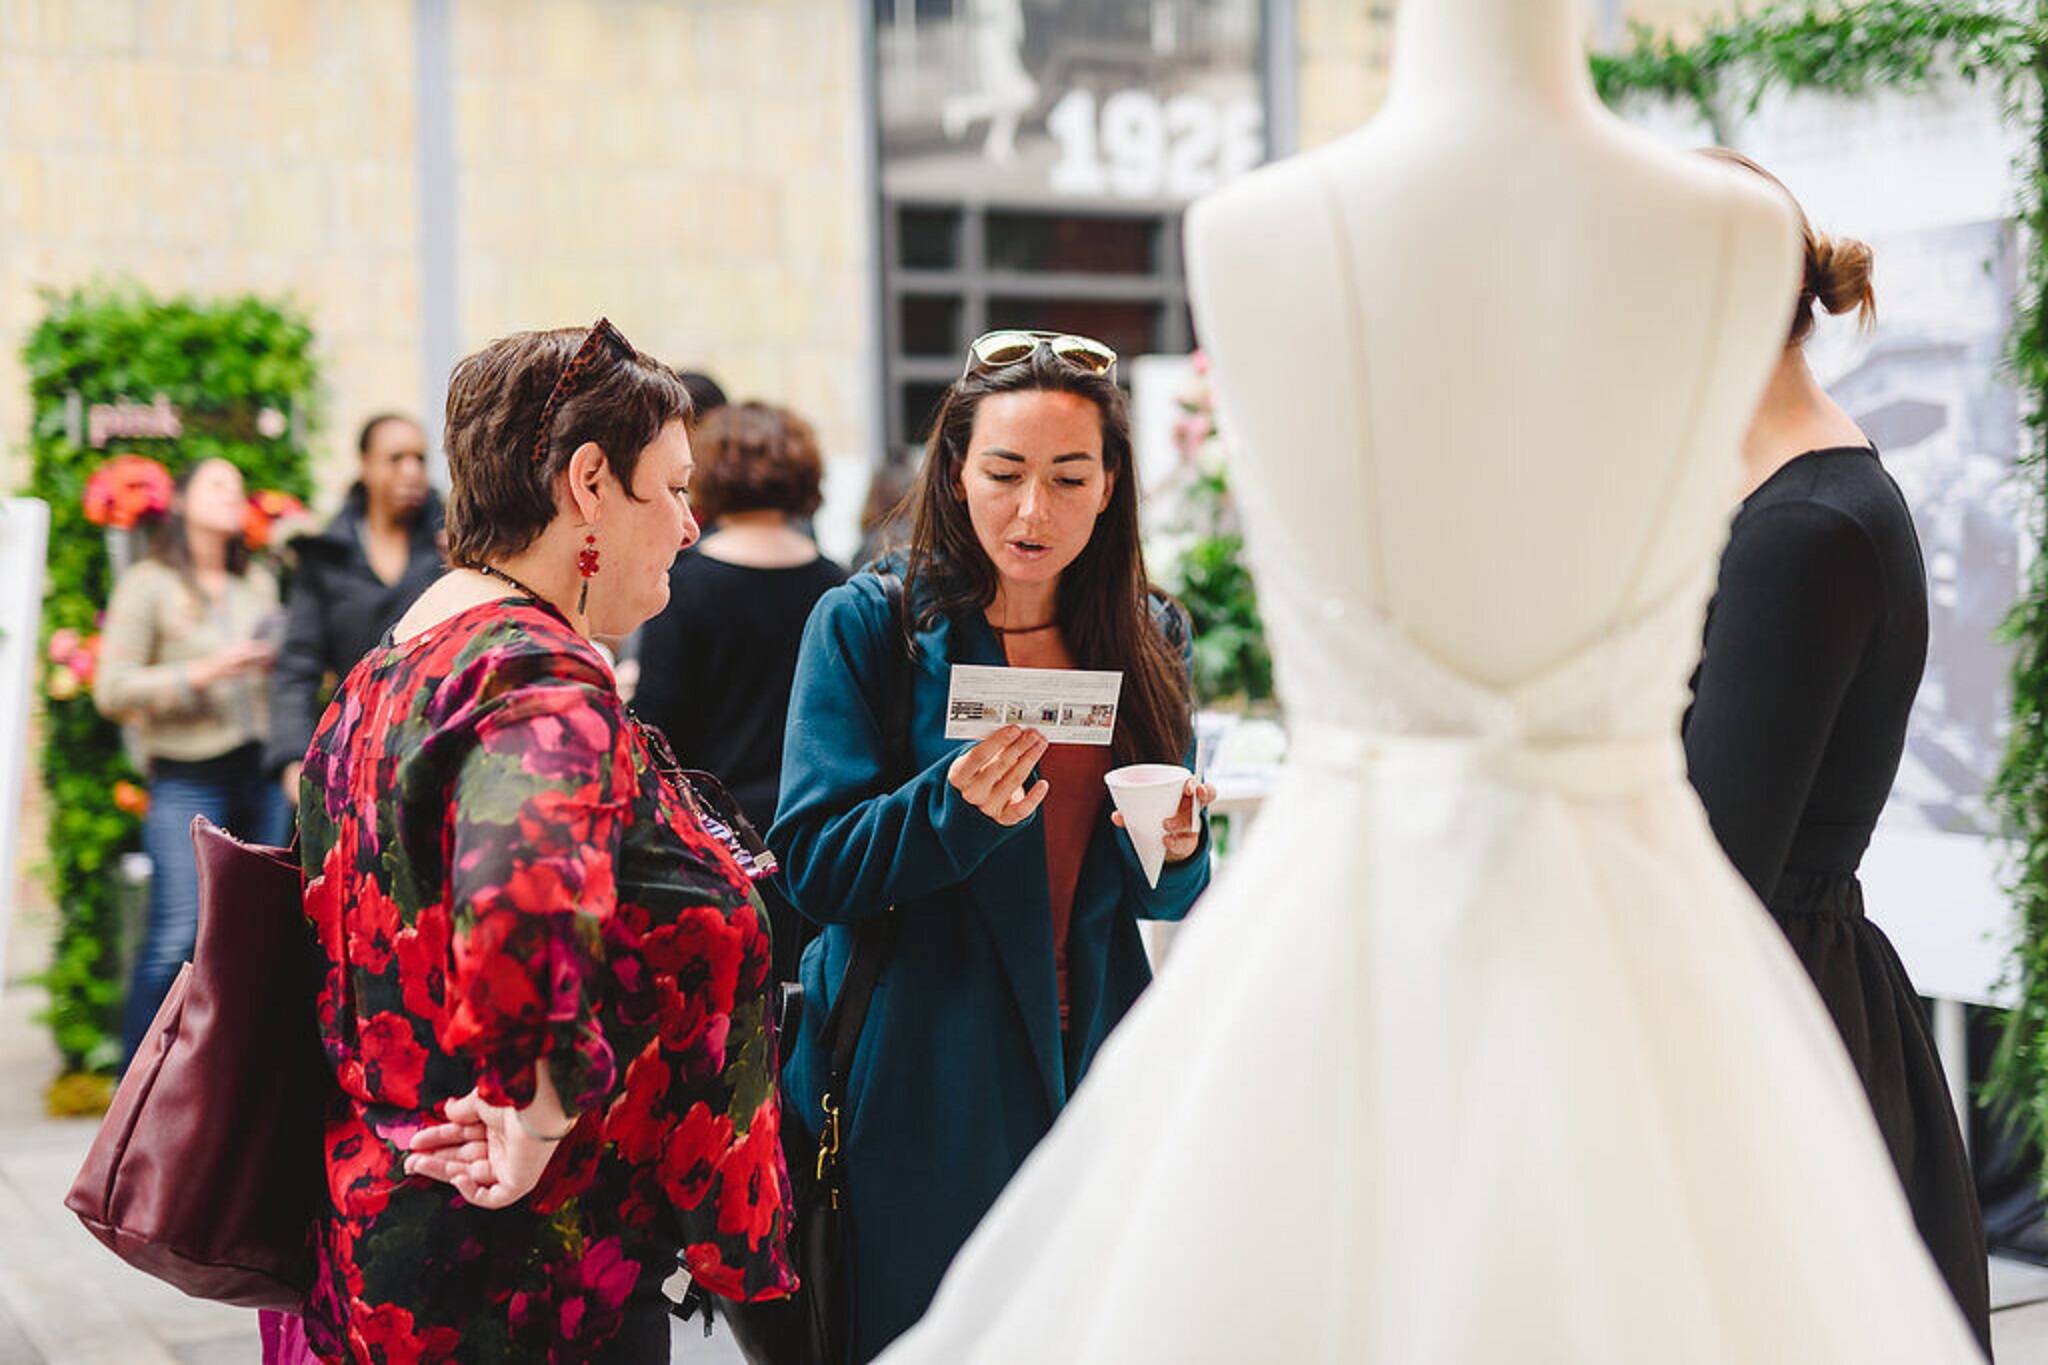 The top 10 wedding & bridal shows in Toronto for 2018